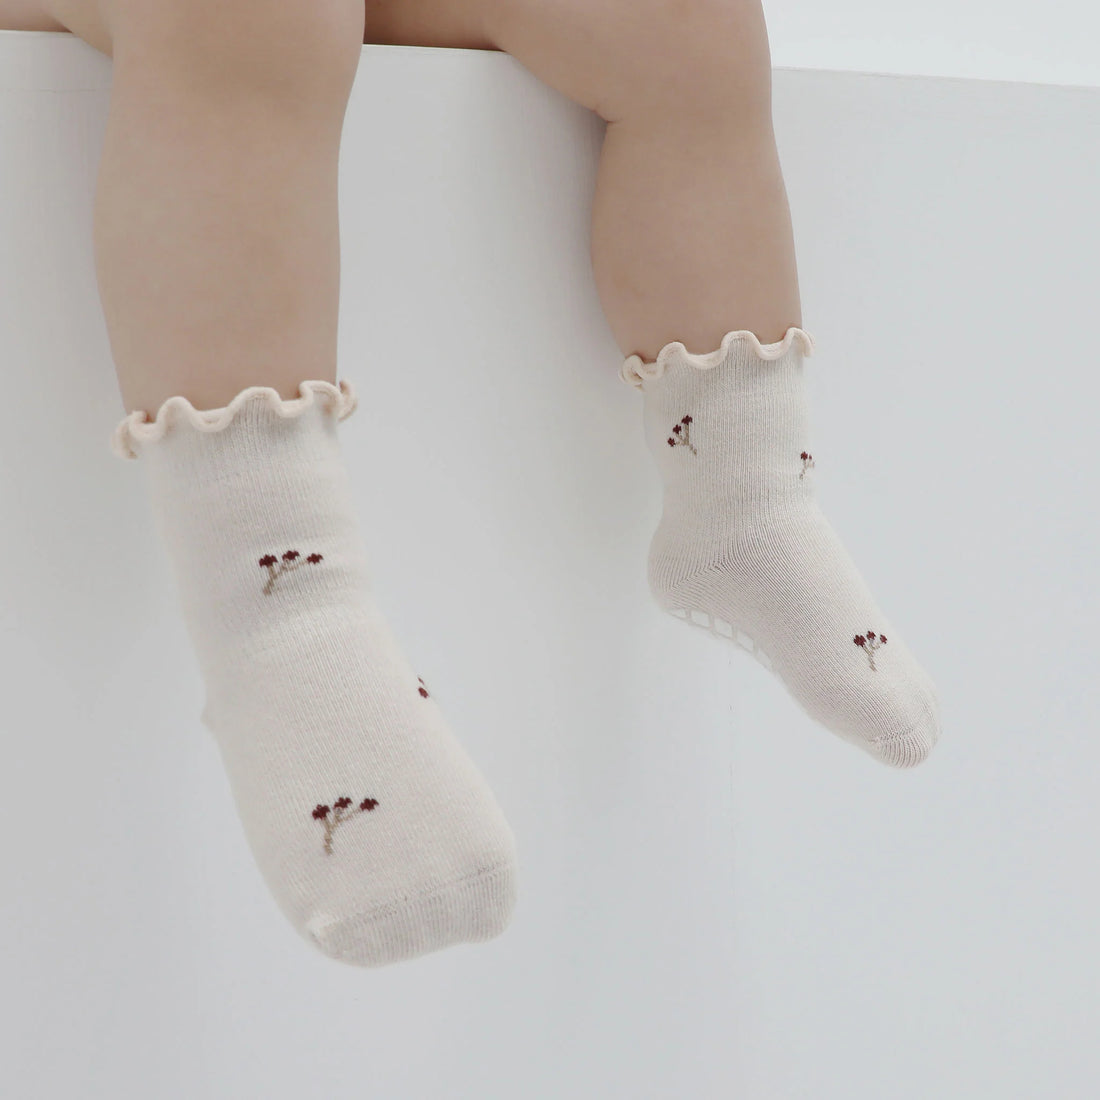 How Grip Socks for Toddlers Promote Safety and Confidence